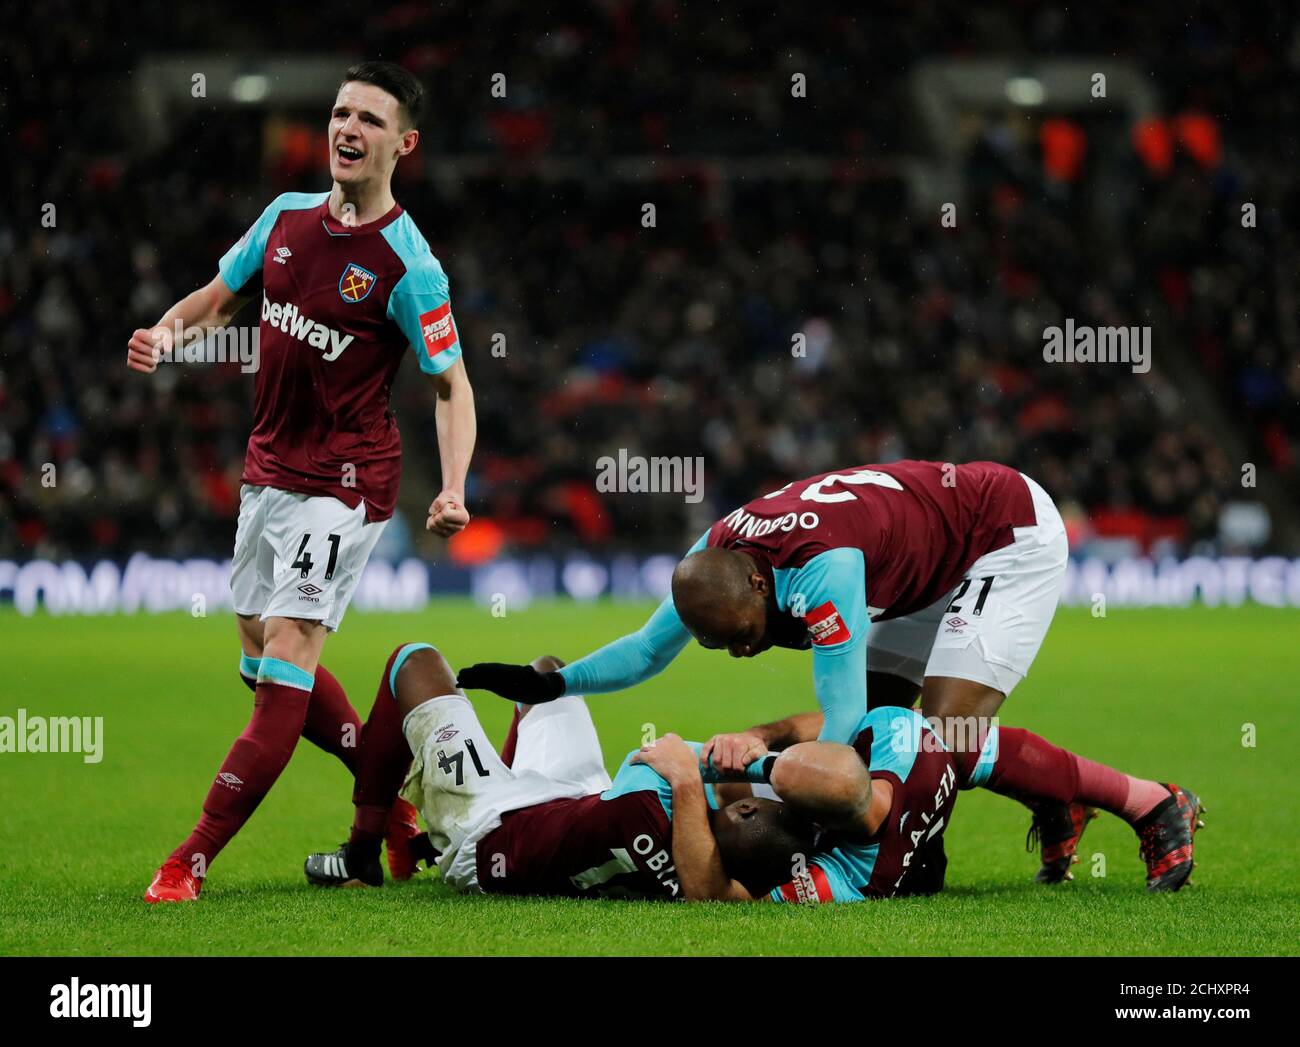 Soccer Football - Premier League - Tottenham Hotspur vs West Ham United - Wembley Stadium, London, Britain - January 4, 2018   West Ham United's Pedro Obiang celebrates scoring their first goal with Declan Rice, Pablo Zabaleta and Angelo Ogbonna    REUTERS/Eddie Keogh    EDITORIAL USE ONLY. No use with unauthorized audio, video, data, fixture lists, club/league logos or 'live' services. Online in-match use limited to 75 images, no video emulation. No use in betting, games or single club/league/player publications.  Please contact your account representative for further details. Stock Photo